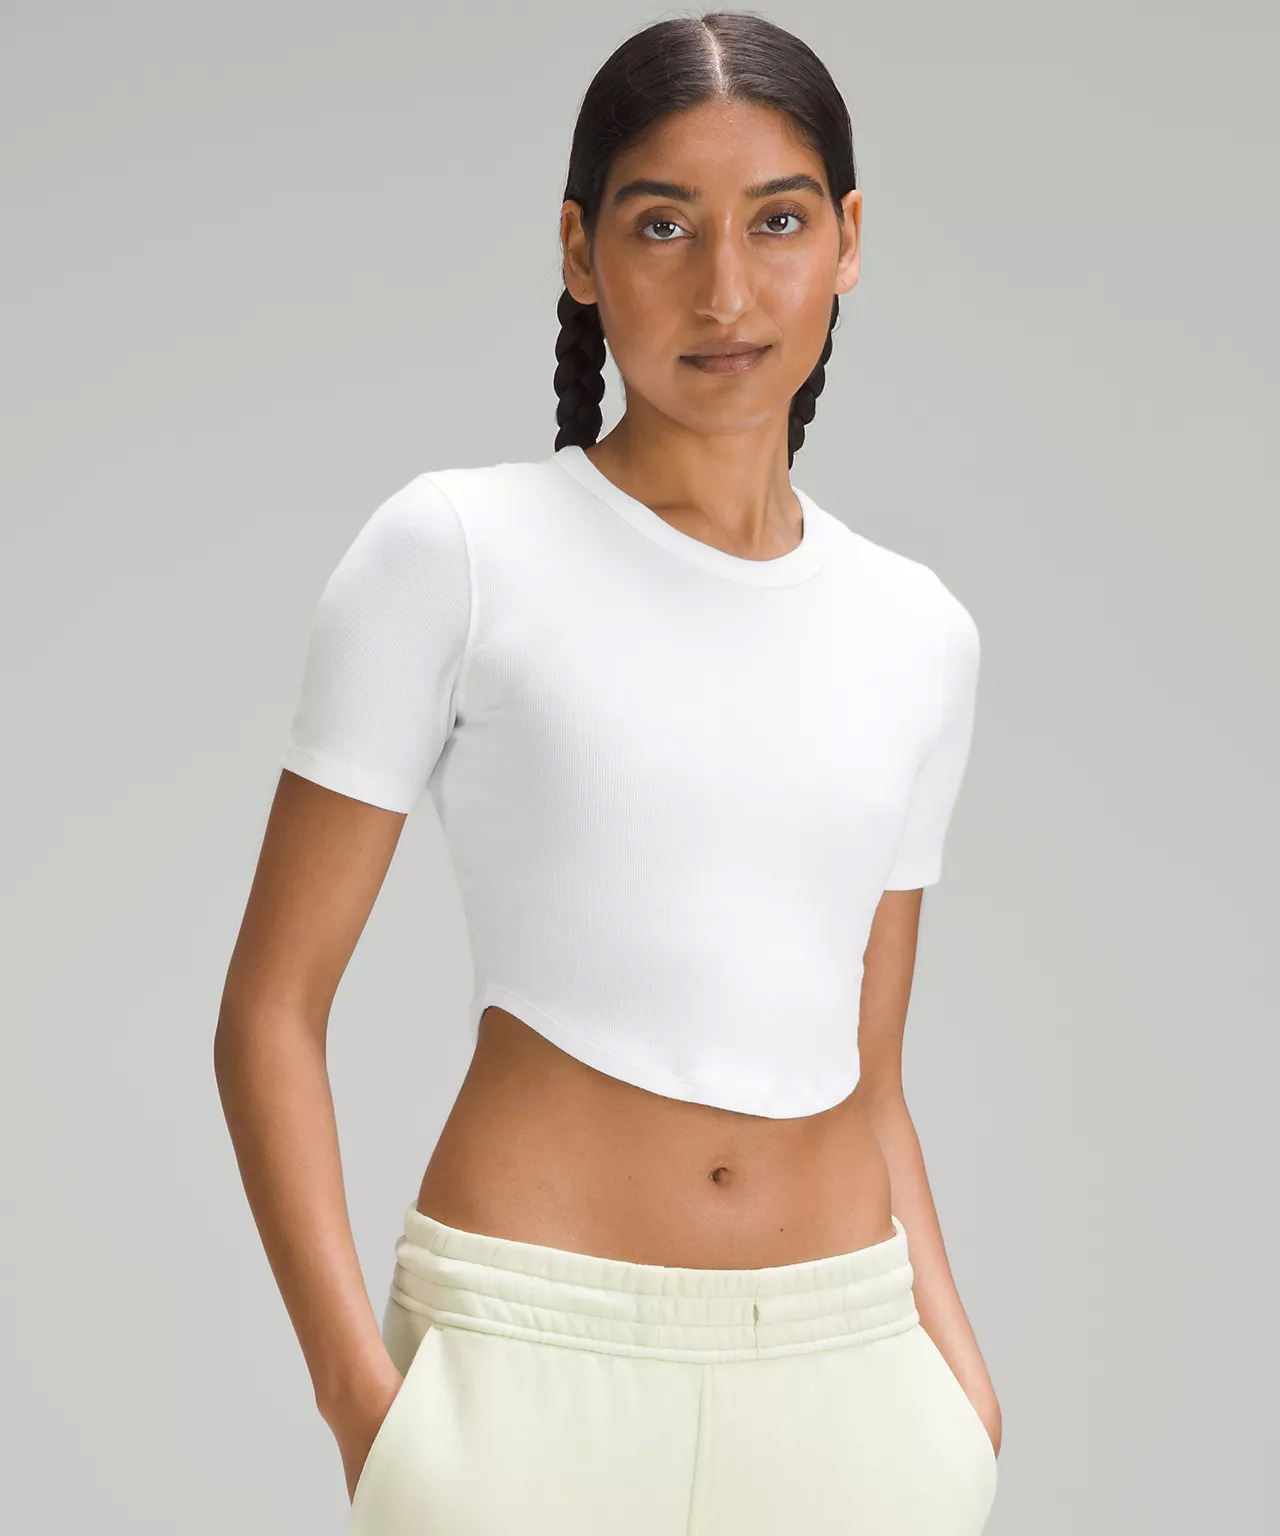 lululemon Women's Hold Tight Cropped T-Shirt (4 Colors) $29 + Free Shipping